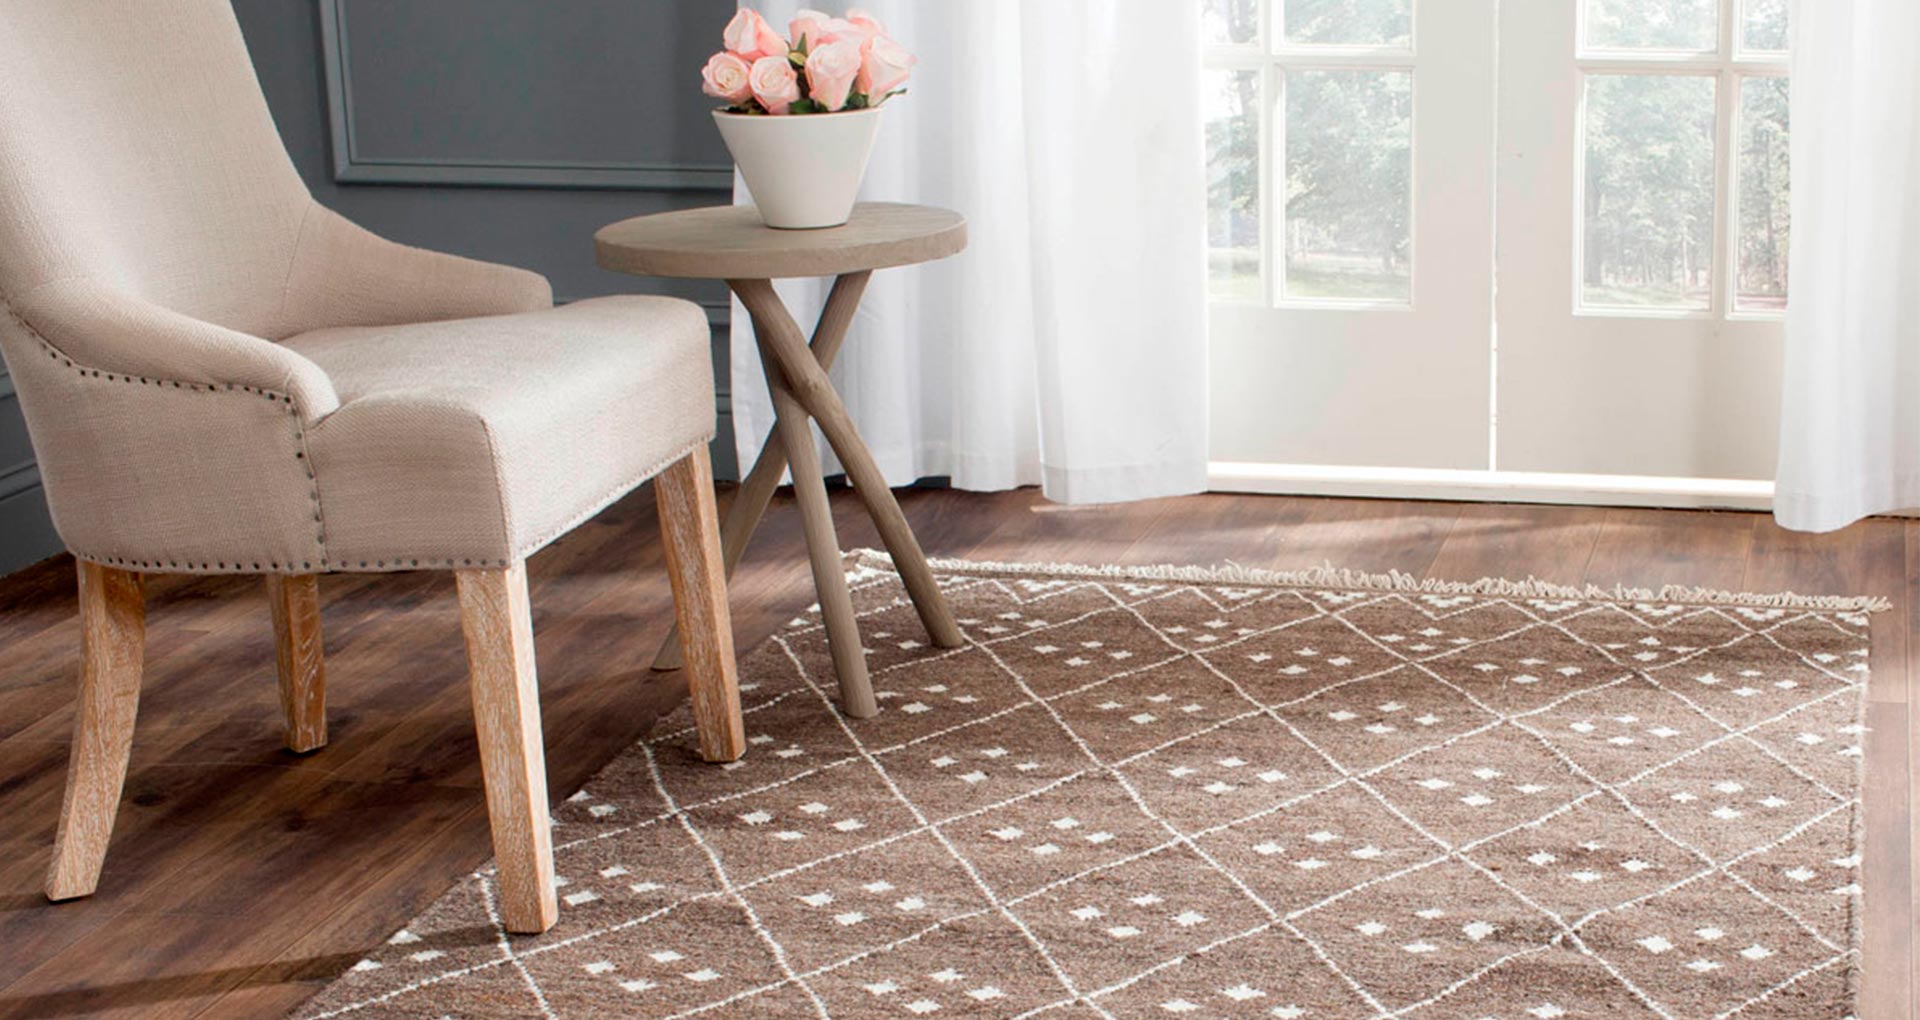 Why Invest in a Handmade Area Rug | Rug Sales Orange County | Orange County Rug Sales Company